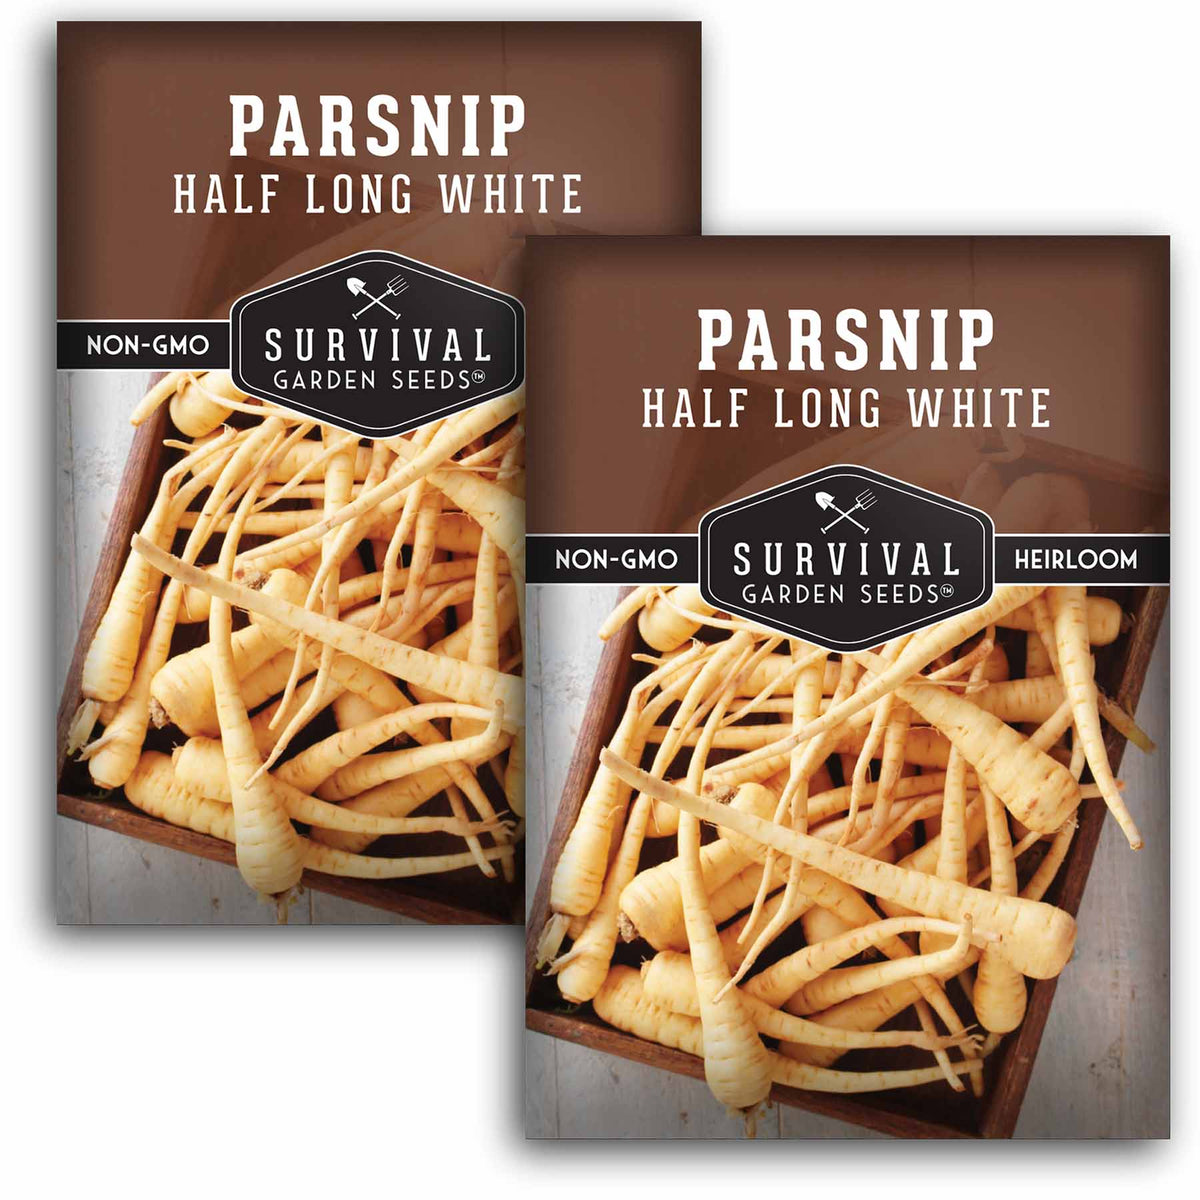 2 packets of Half Long White Parsnip seeds